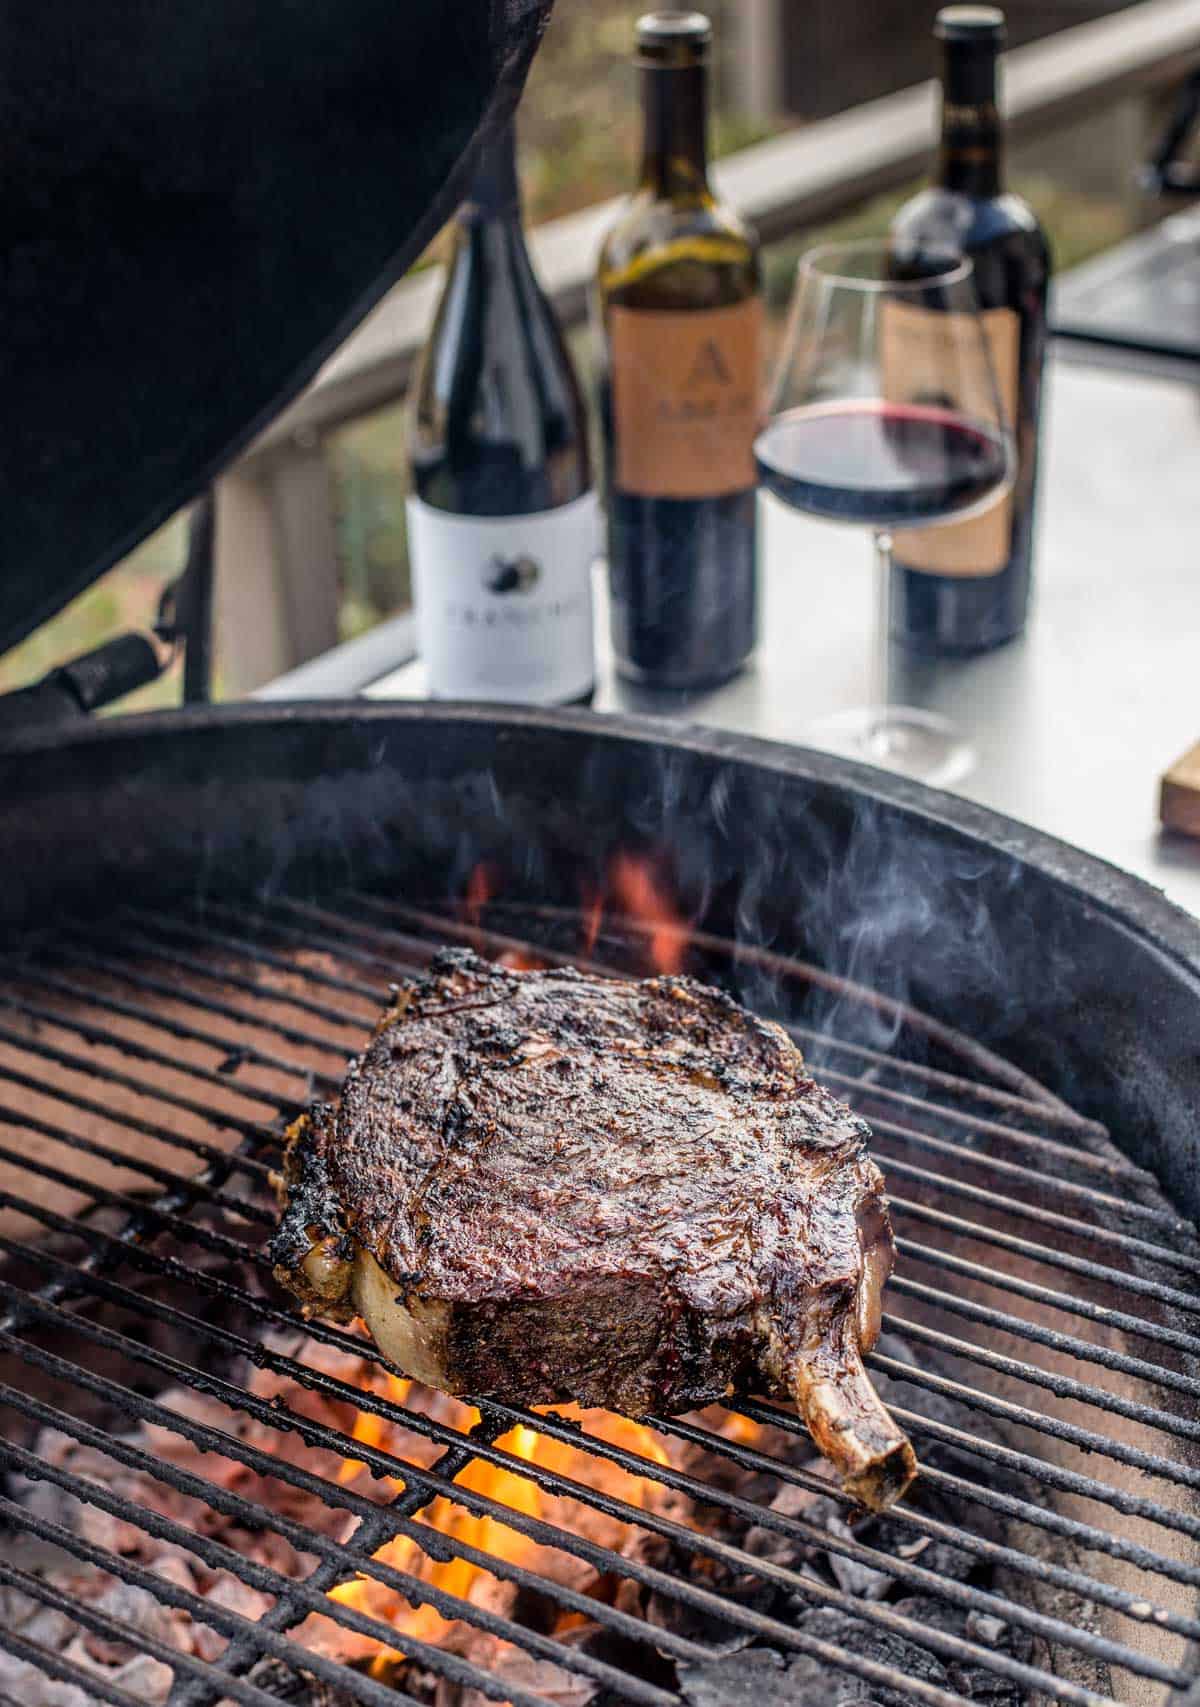 Cowboye ribeye over direct heat with Cabernet Sauvignon wine in background.